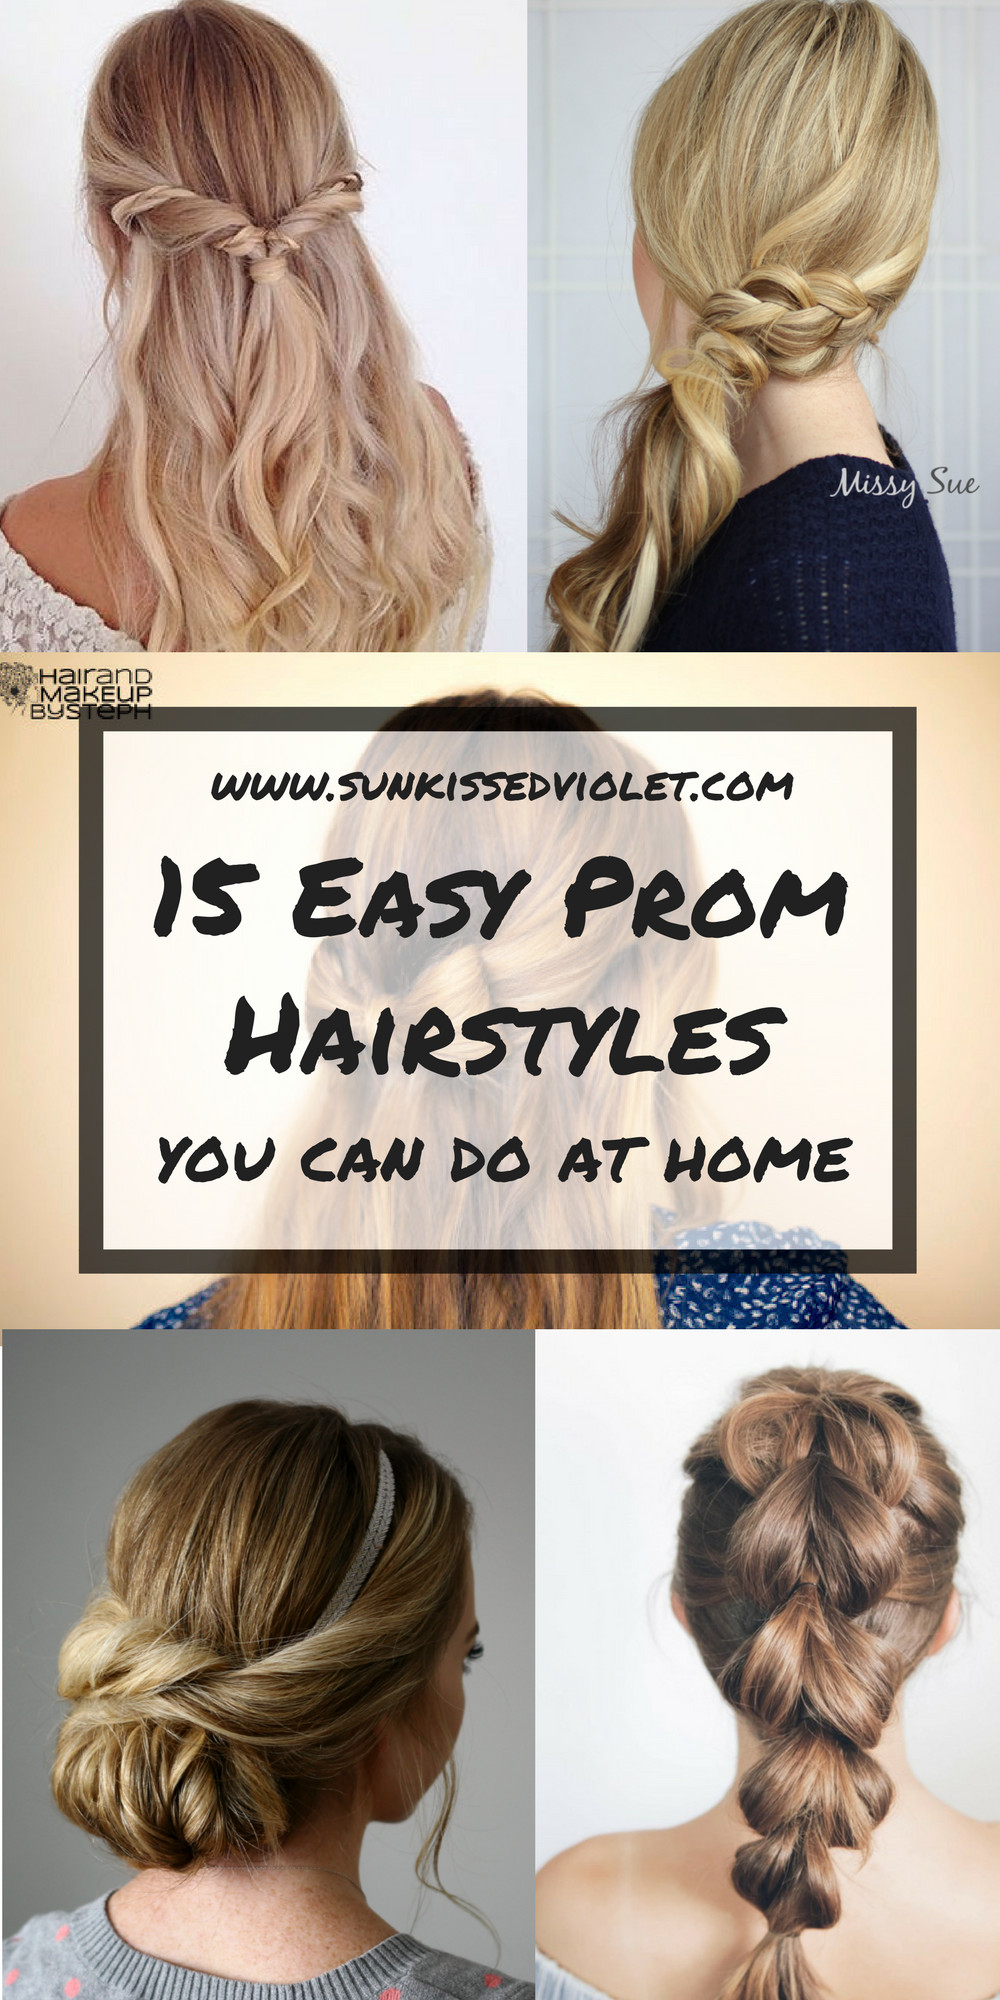 Easy Prom Hairstyles Updos
 Great Ideas 23 Updo Hairstyles You Can Do At Home